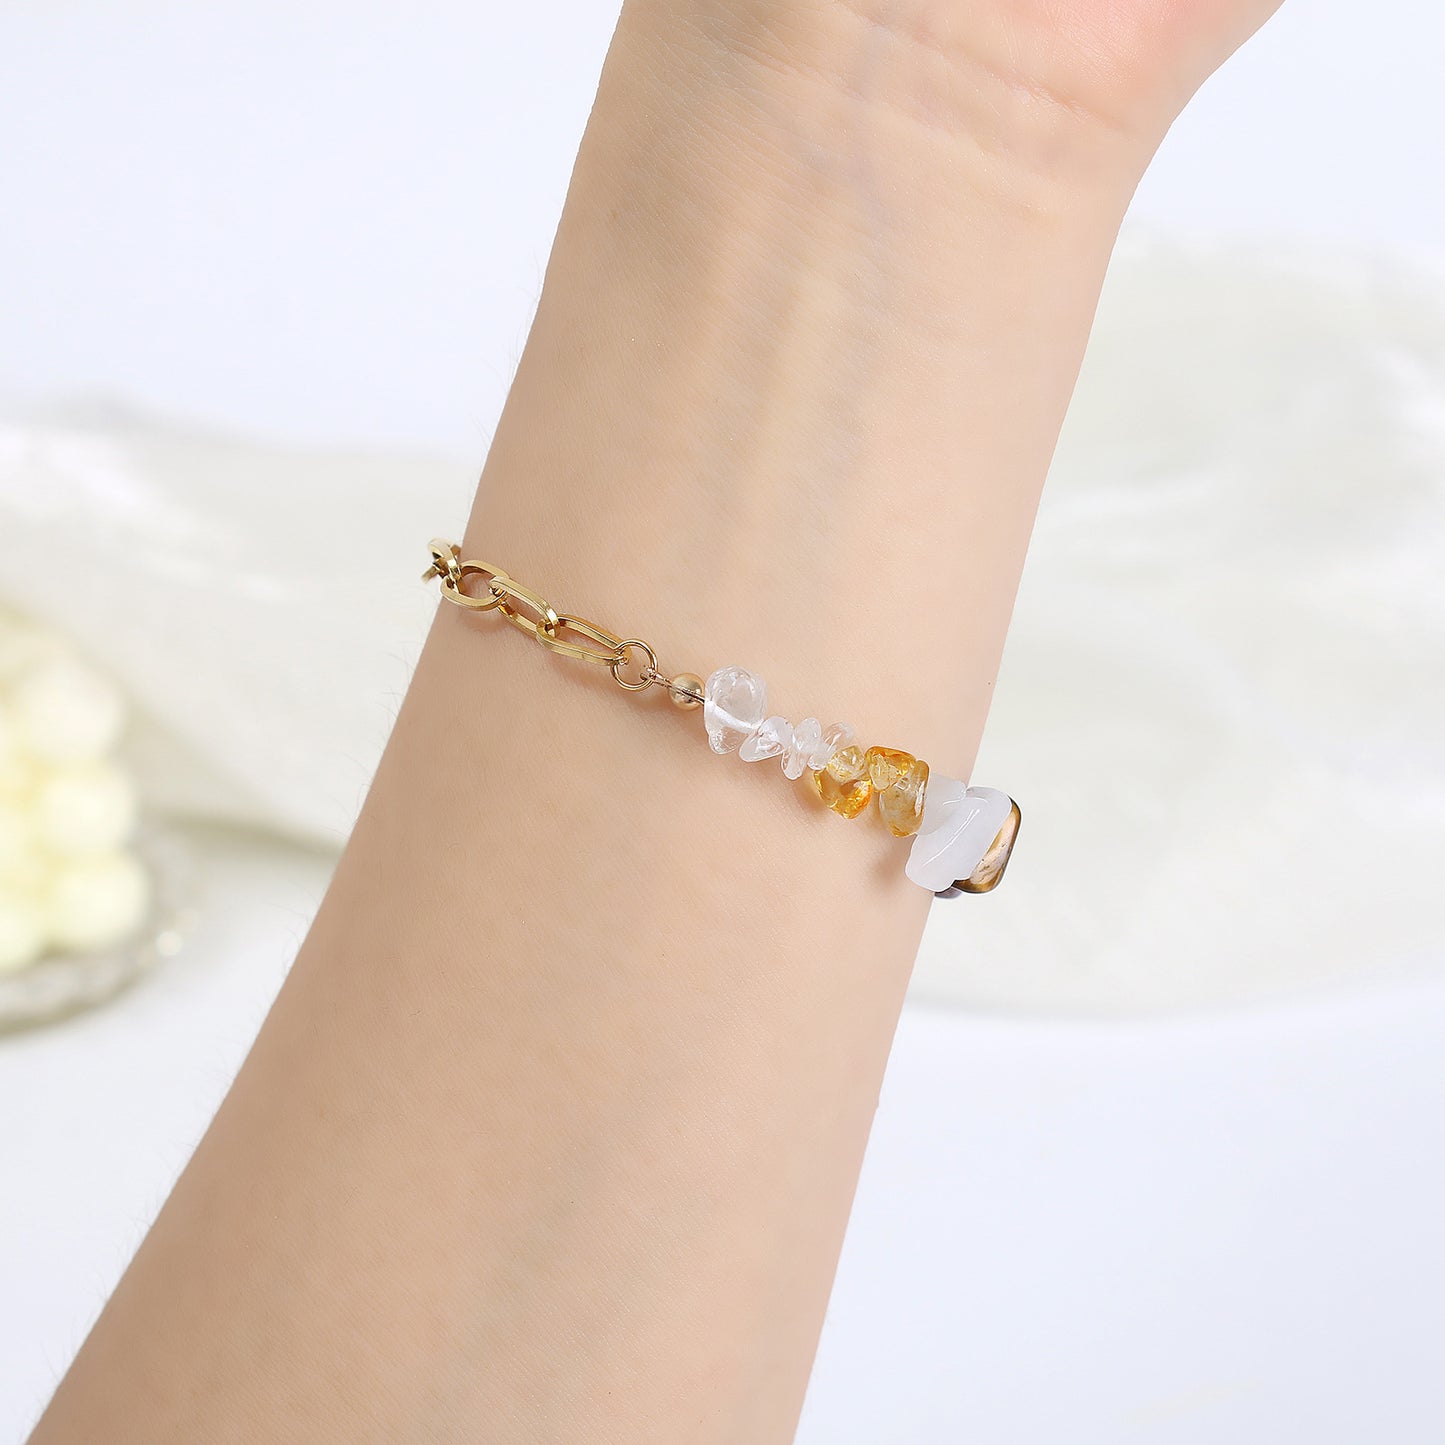 Natural Crystal Gravel and Stainless Steel Dual Bracelet